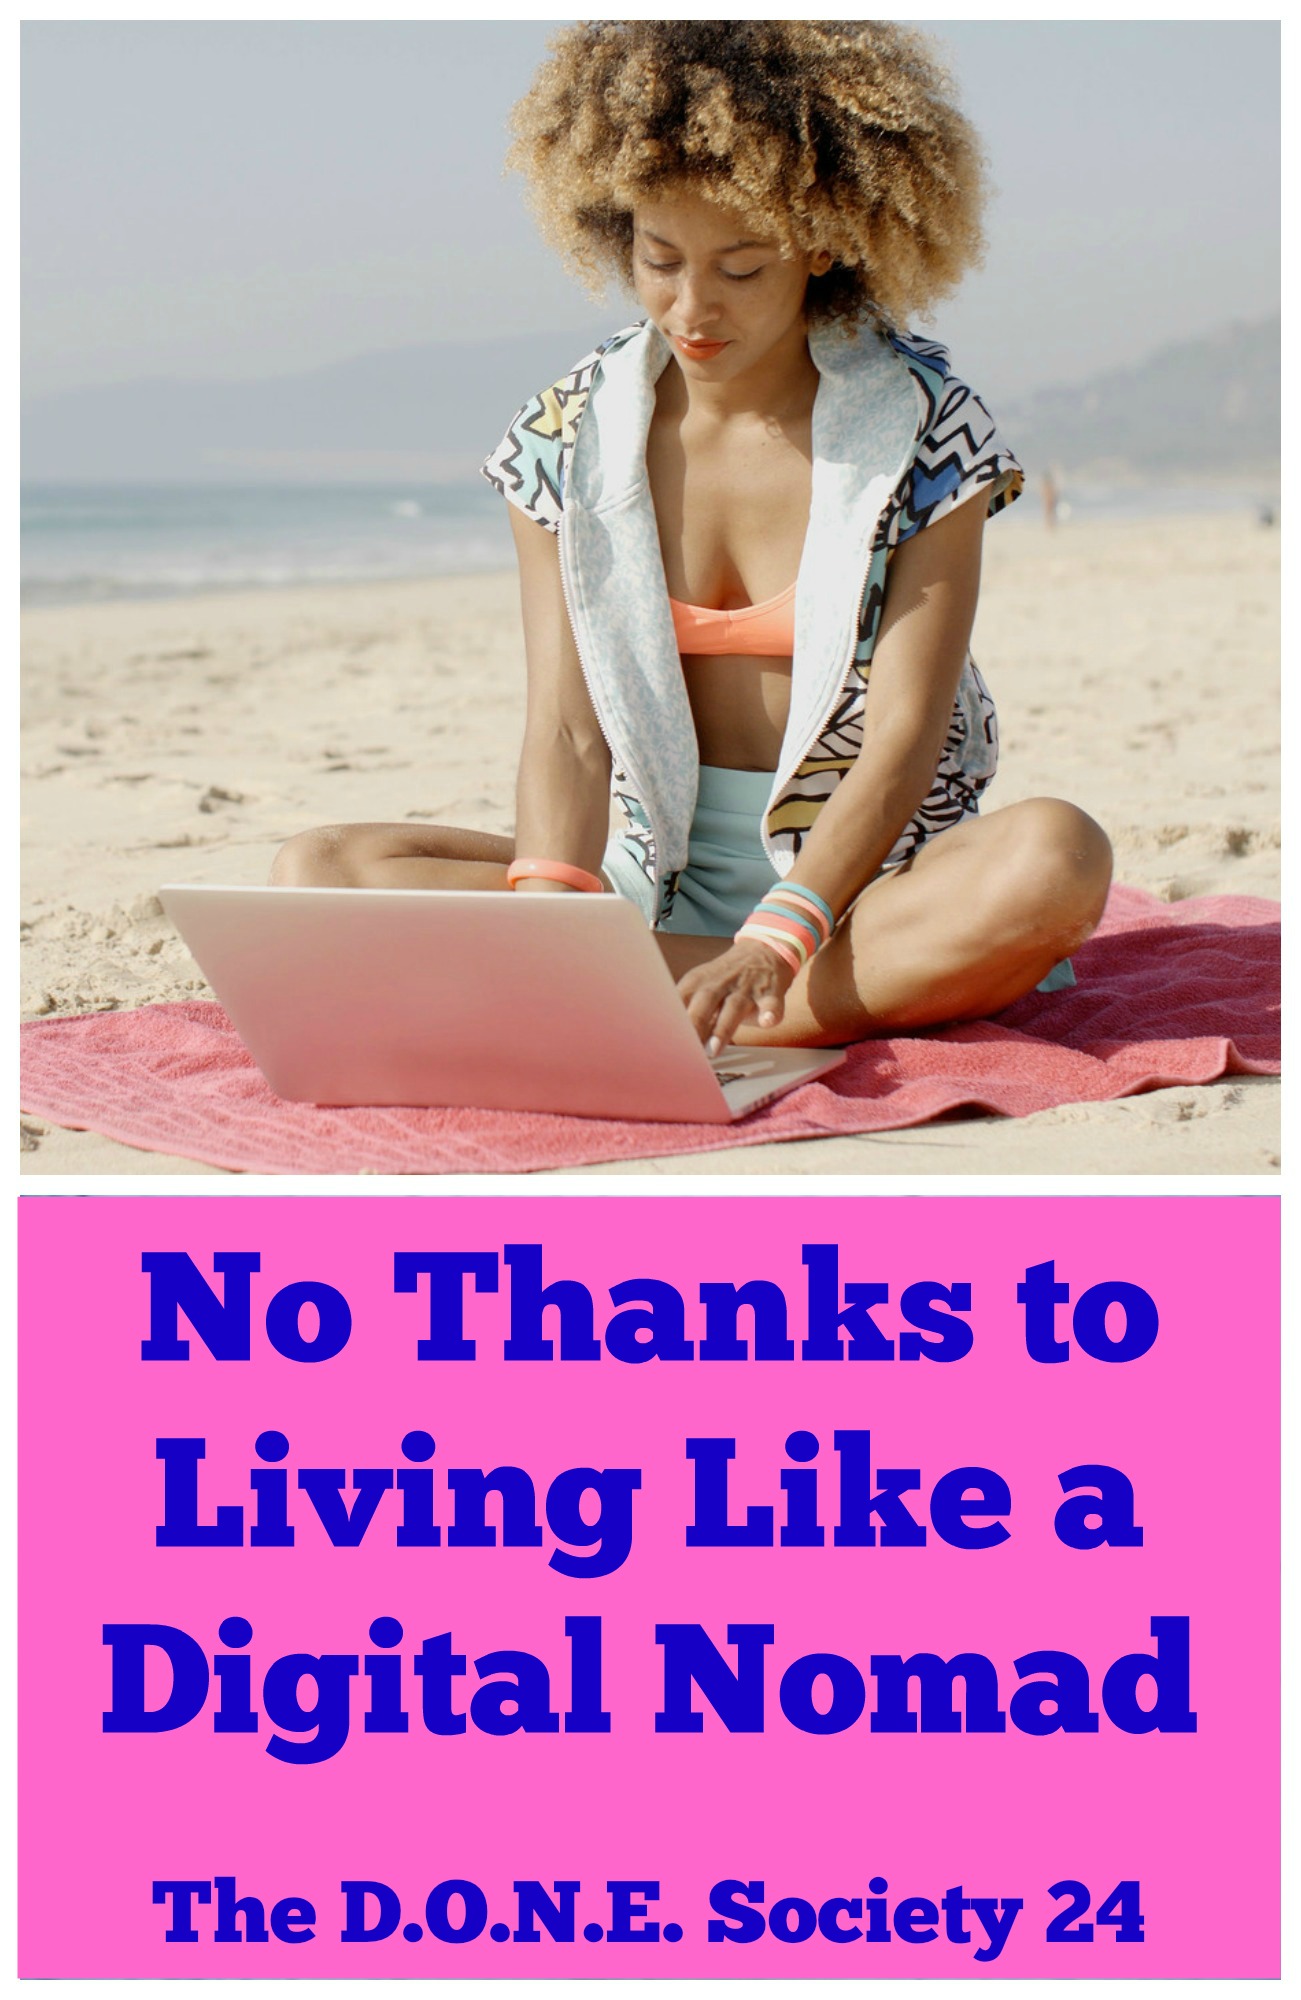 No Thanks to Living Like a Digital Nomad-The D.O.N.E. Society 24